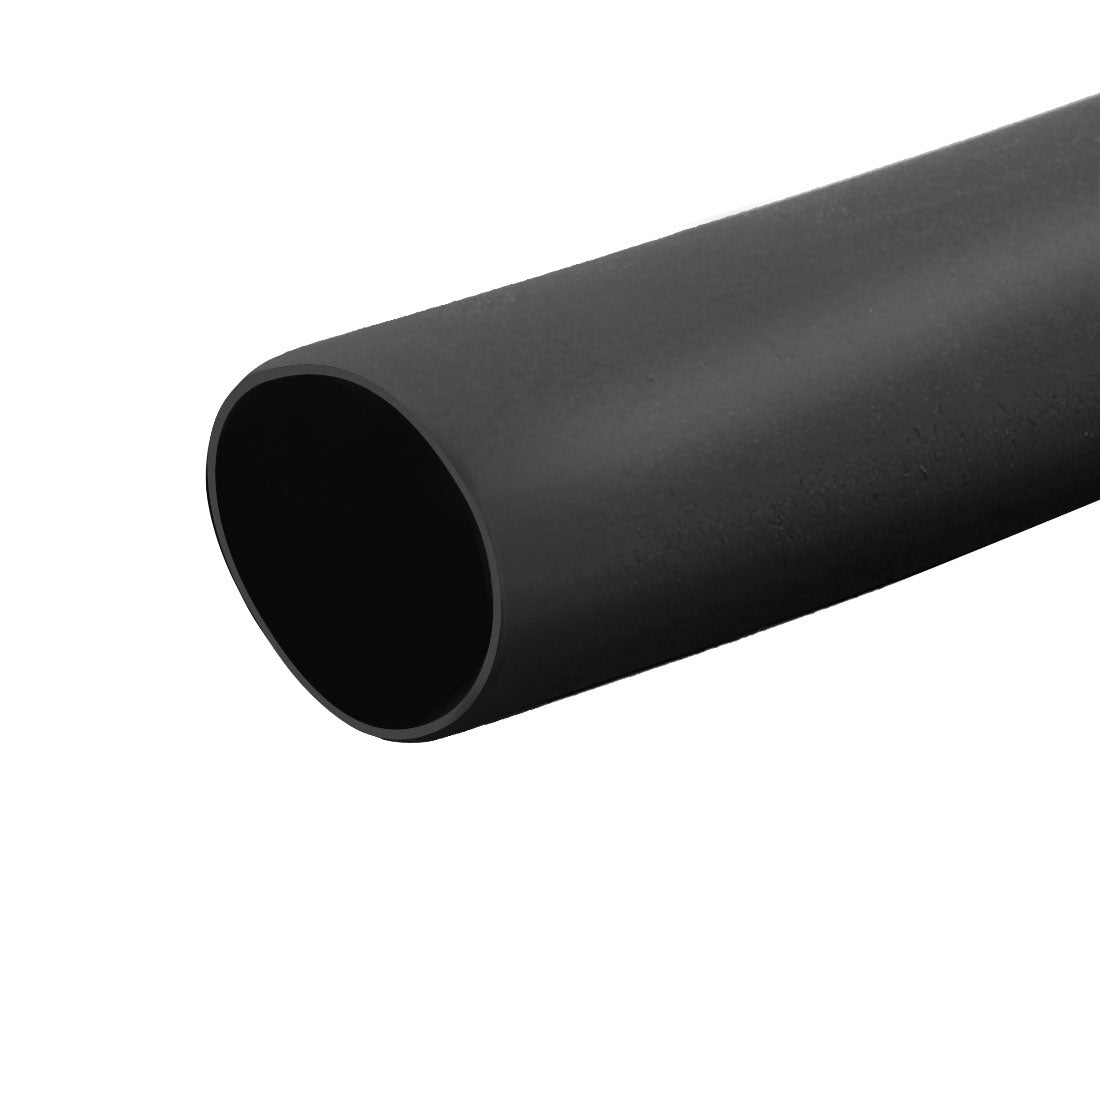 uxcell Uxcell Heat Shrink Tube 2:1 Electrical Insulation Tube Wire Cable Tubing Sleeving Wrap Black 3mm Diameter 1m Long